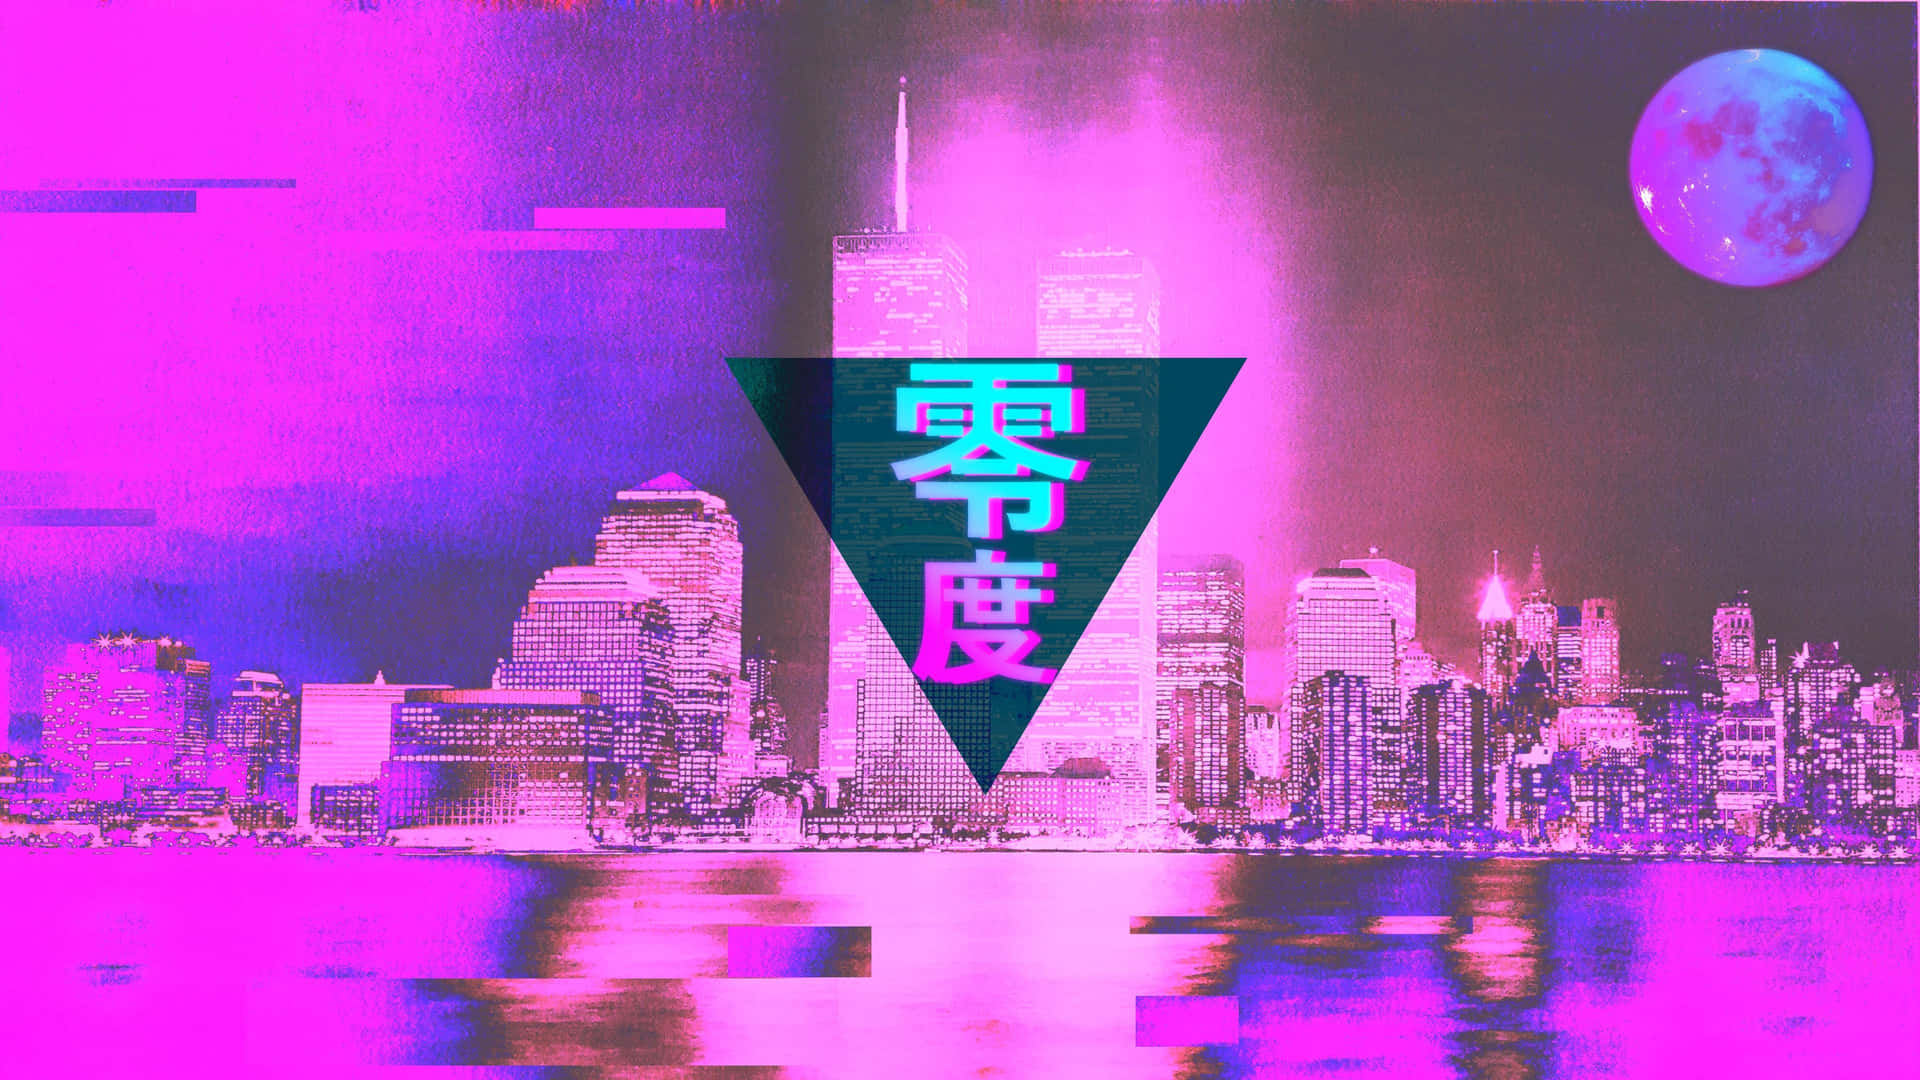 Enjoy a grunge pink aesthetic while using your laptop! Wallpaper